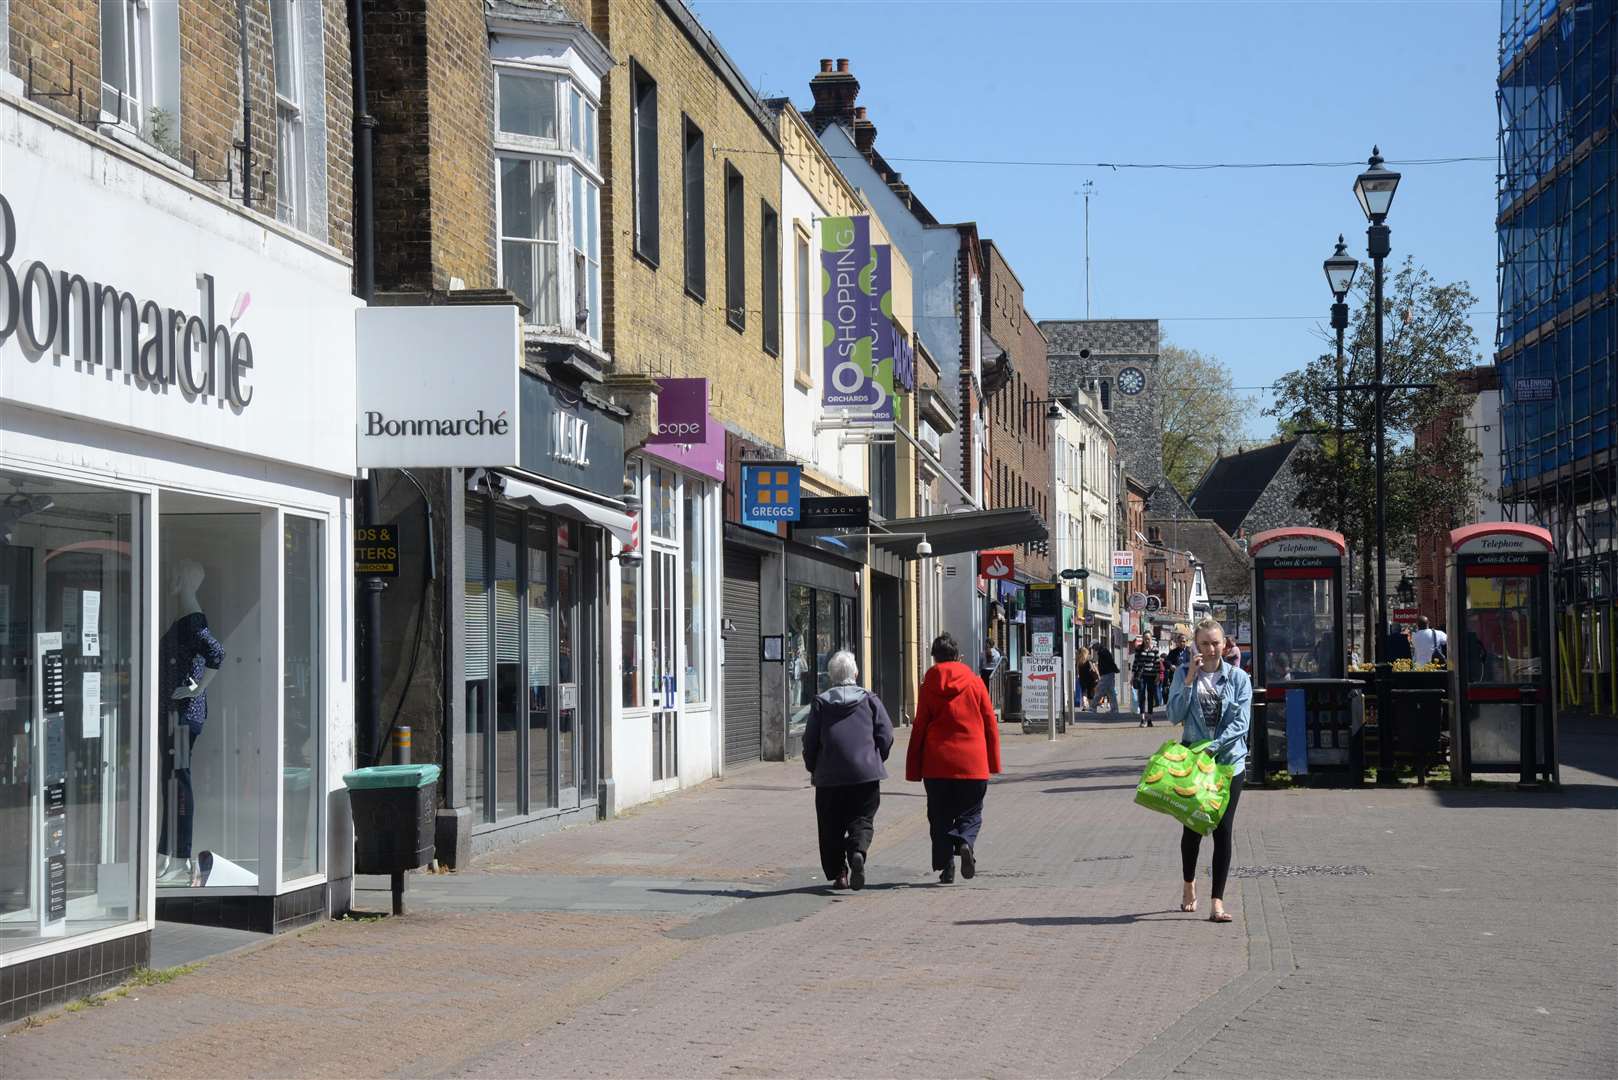 Dartford High Street is hoping to bounce back. Picture: Chris Davey